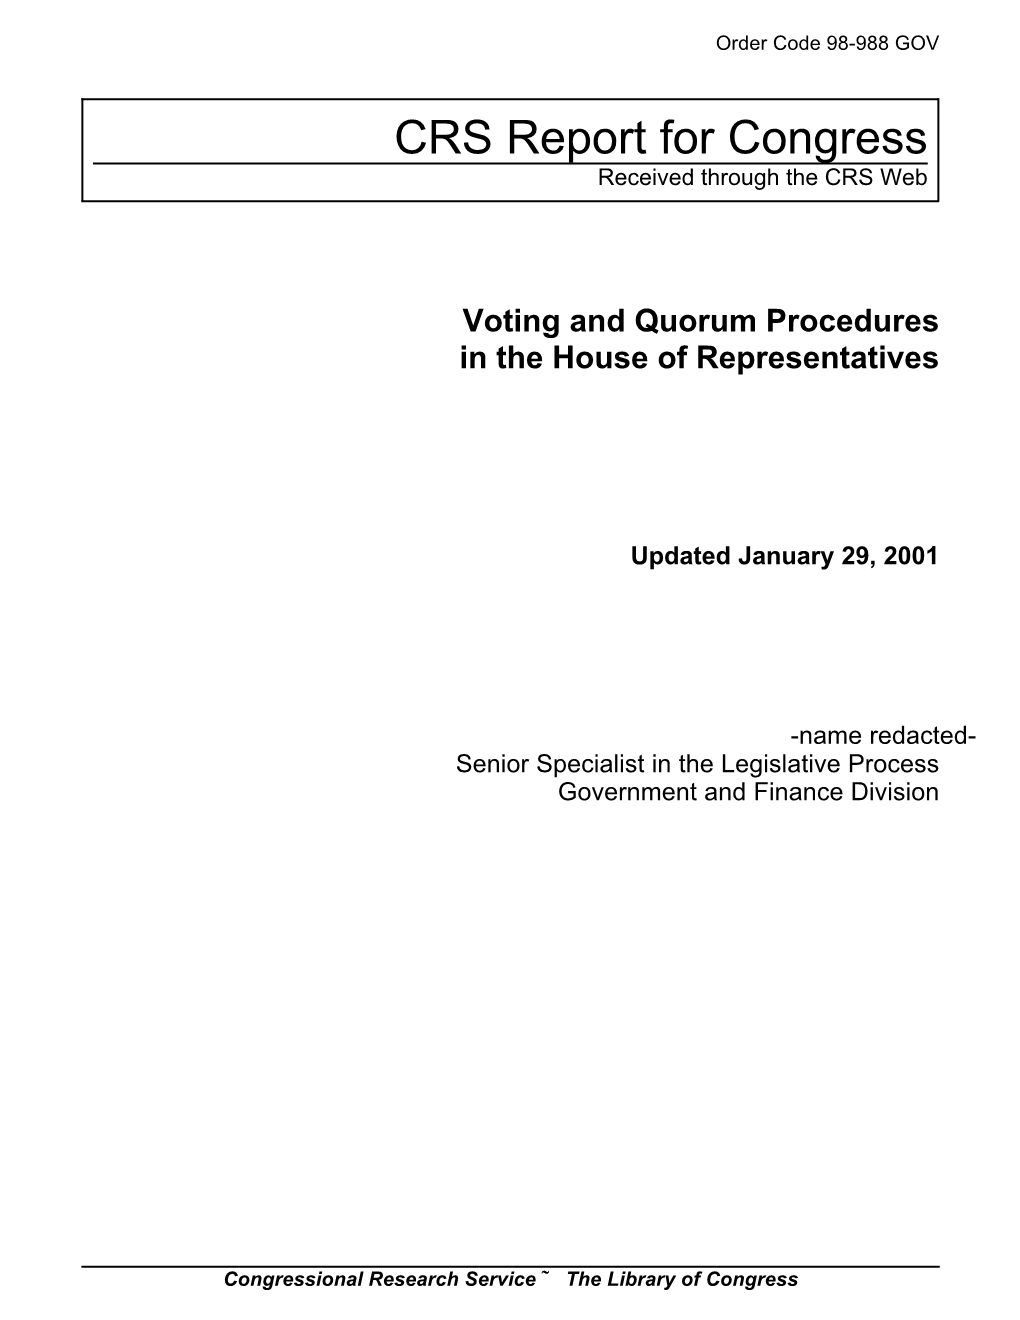 Voting and Quorum Procedures in the House of Representatives